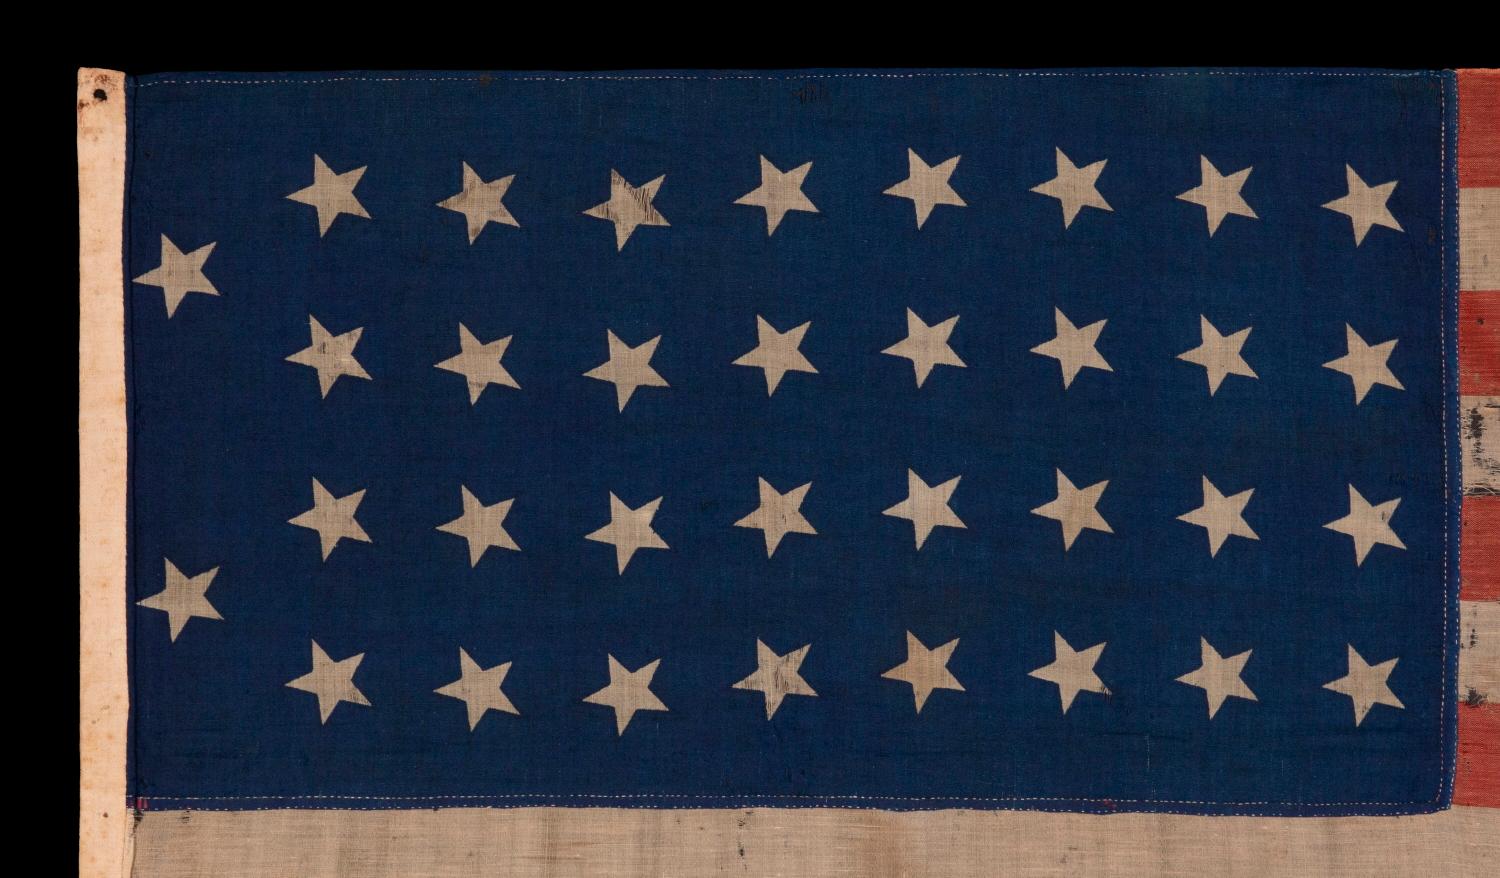 34 STARS IN 4 ROWS WITH 2 STARS OFFSET AT THE HOIST END, LIKELY A UNION ARMY CAMP COLORS, ONE OF ONLY THREE EXAMPLES I HAVE ENCOUNTERED IN THIS EXACT STYLE, OPENING TWO YEARS OF THE CIVIL WAR, 1861-1863, REFLECTS THE PERIOD WHEN KANSAS WAS THE MOST